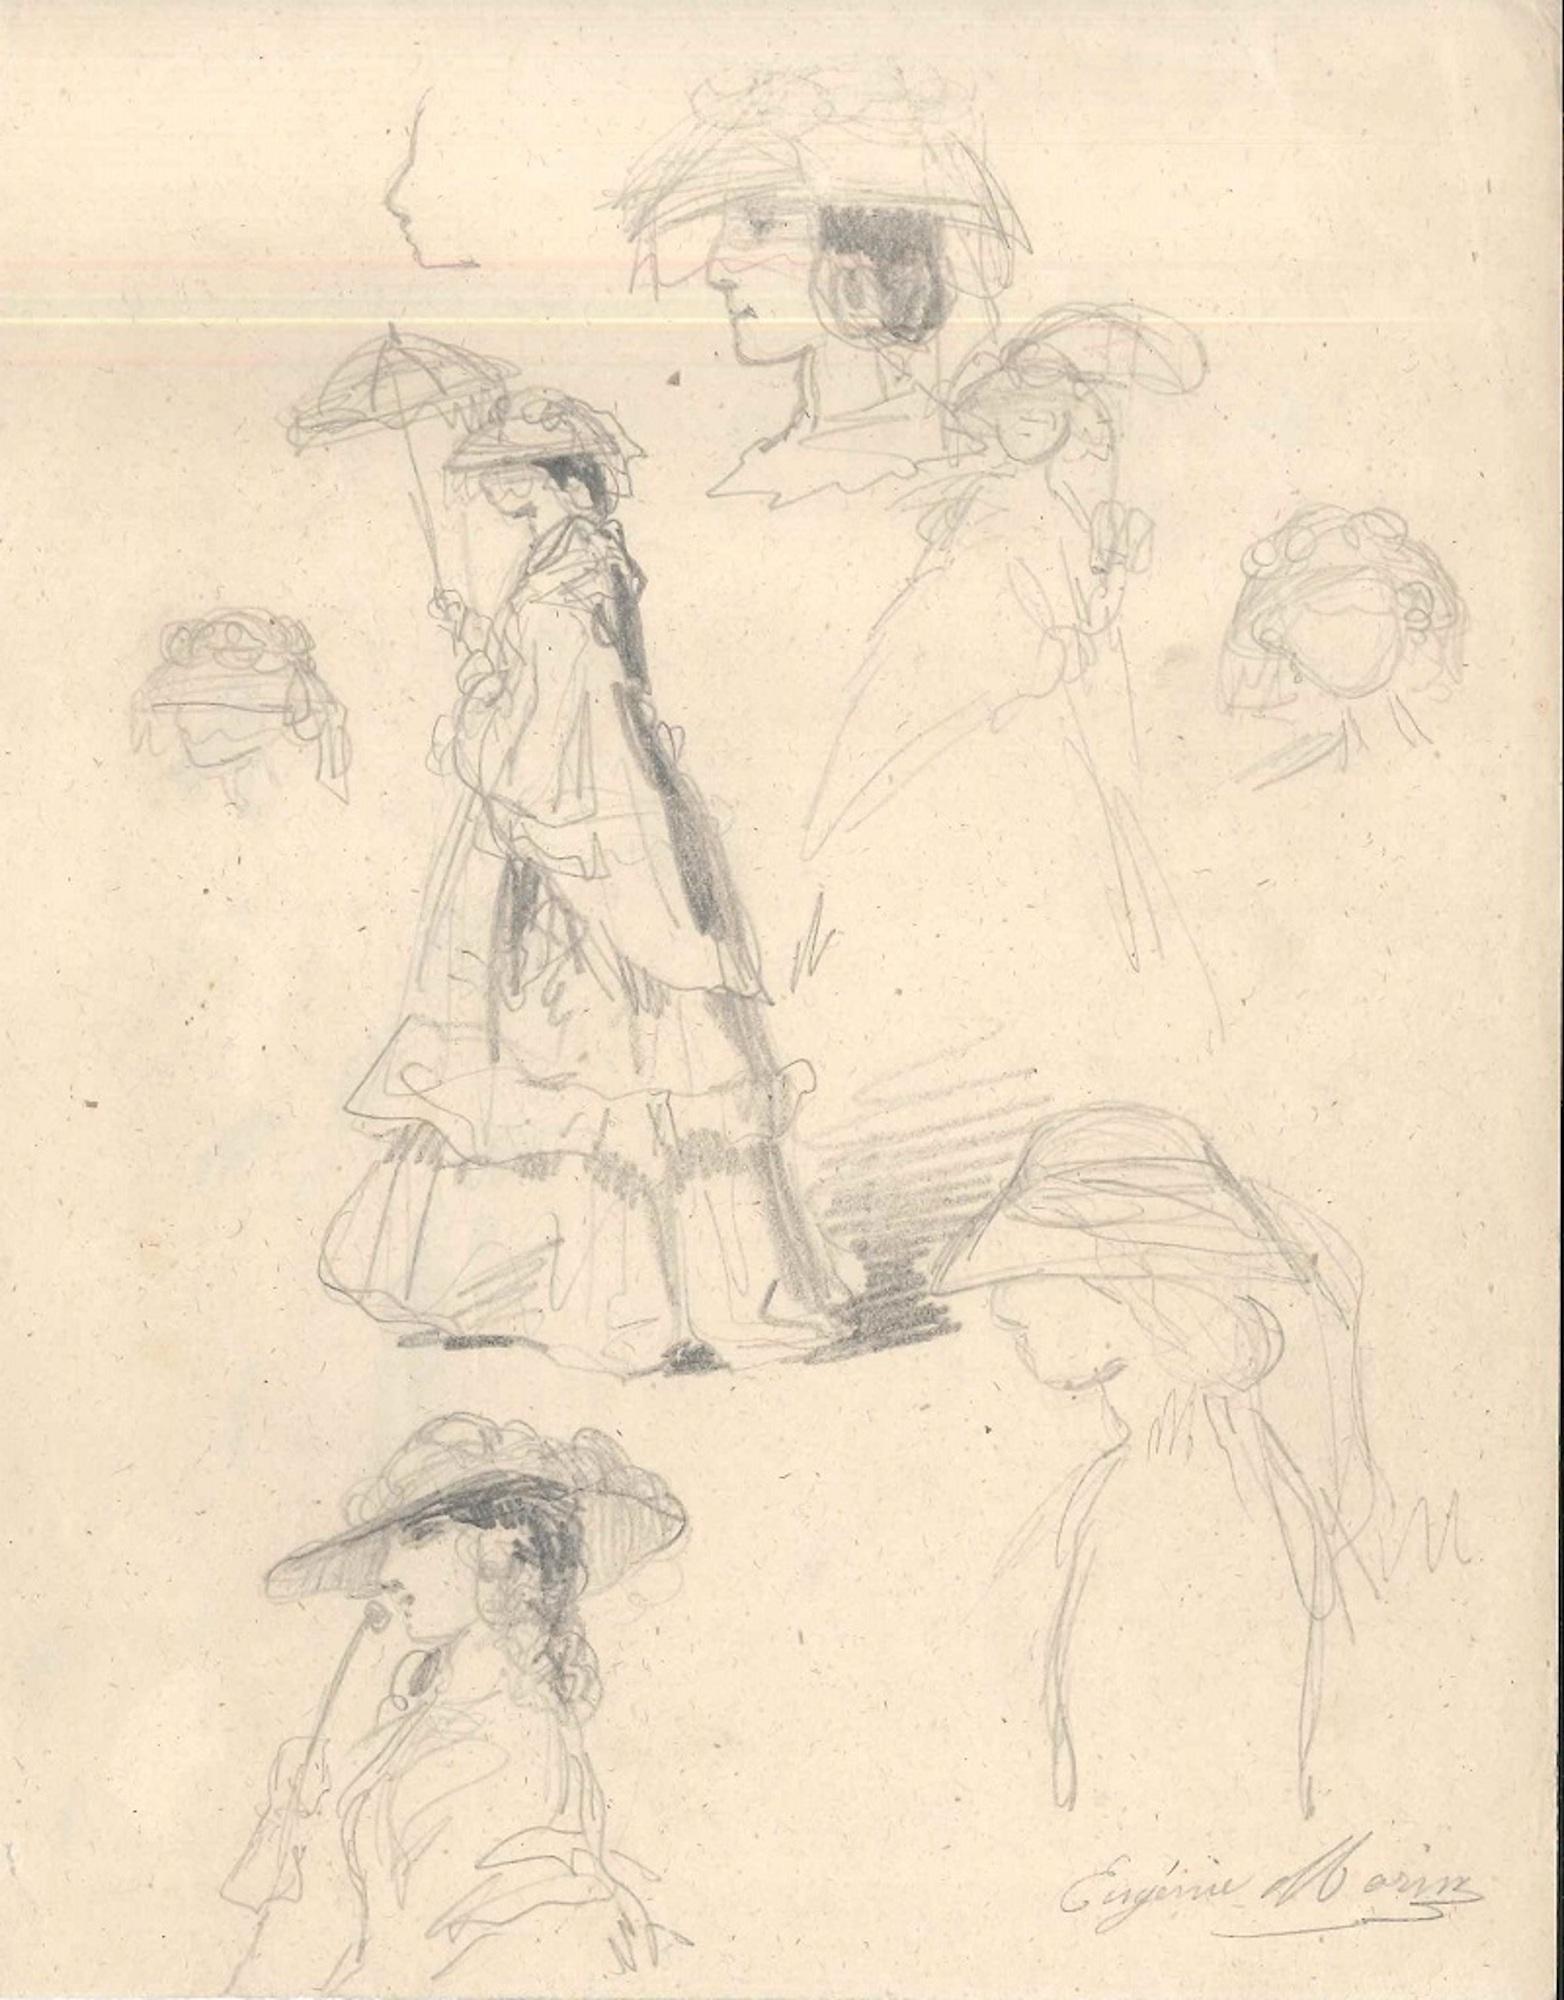 Fashionable Woman - Original Pencil Drawing by E. Morin - Mid 19th century